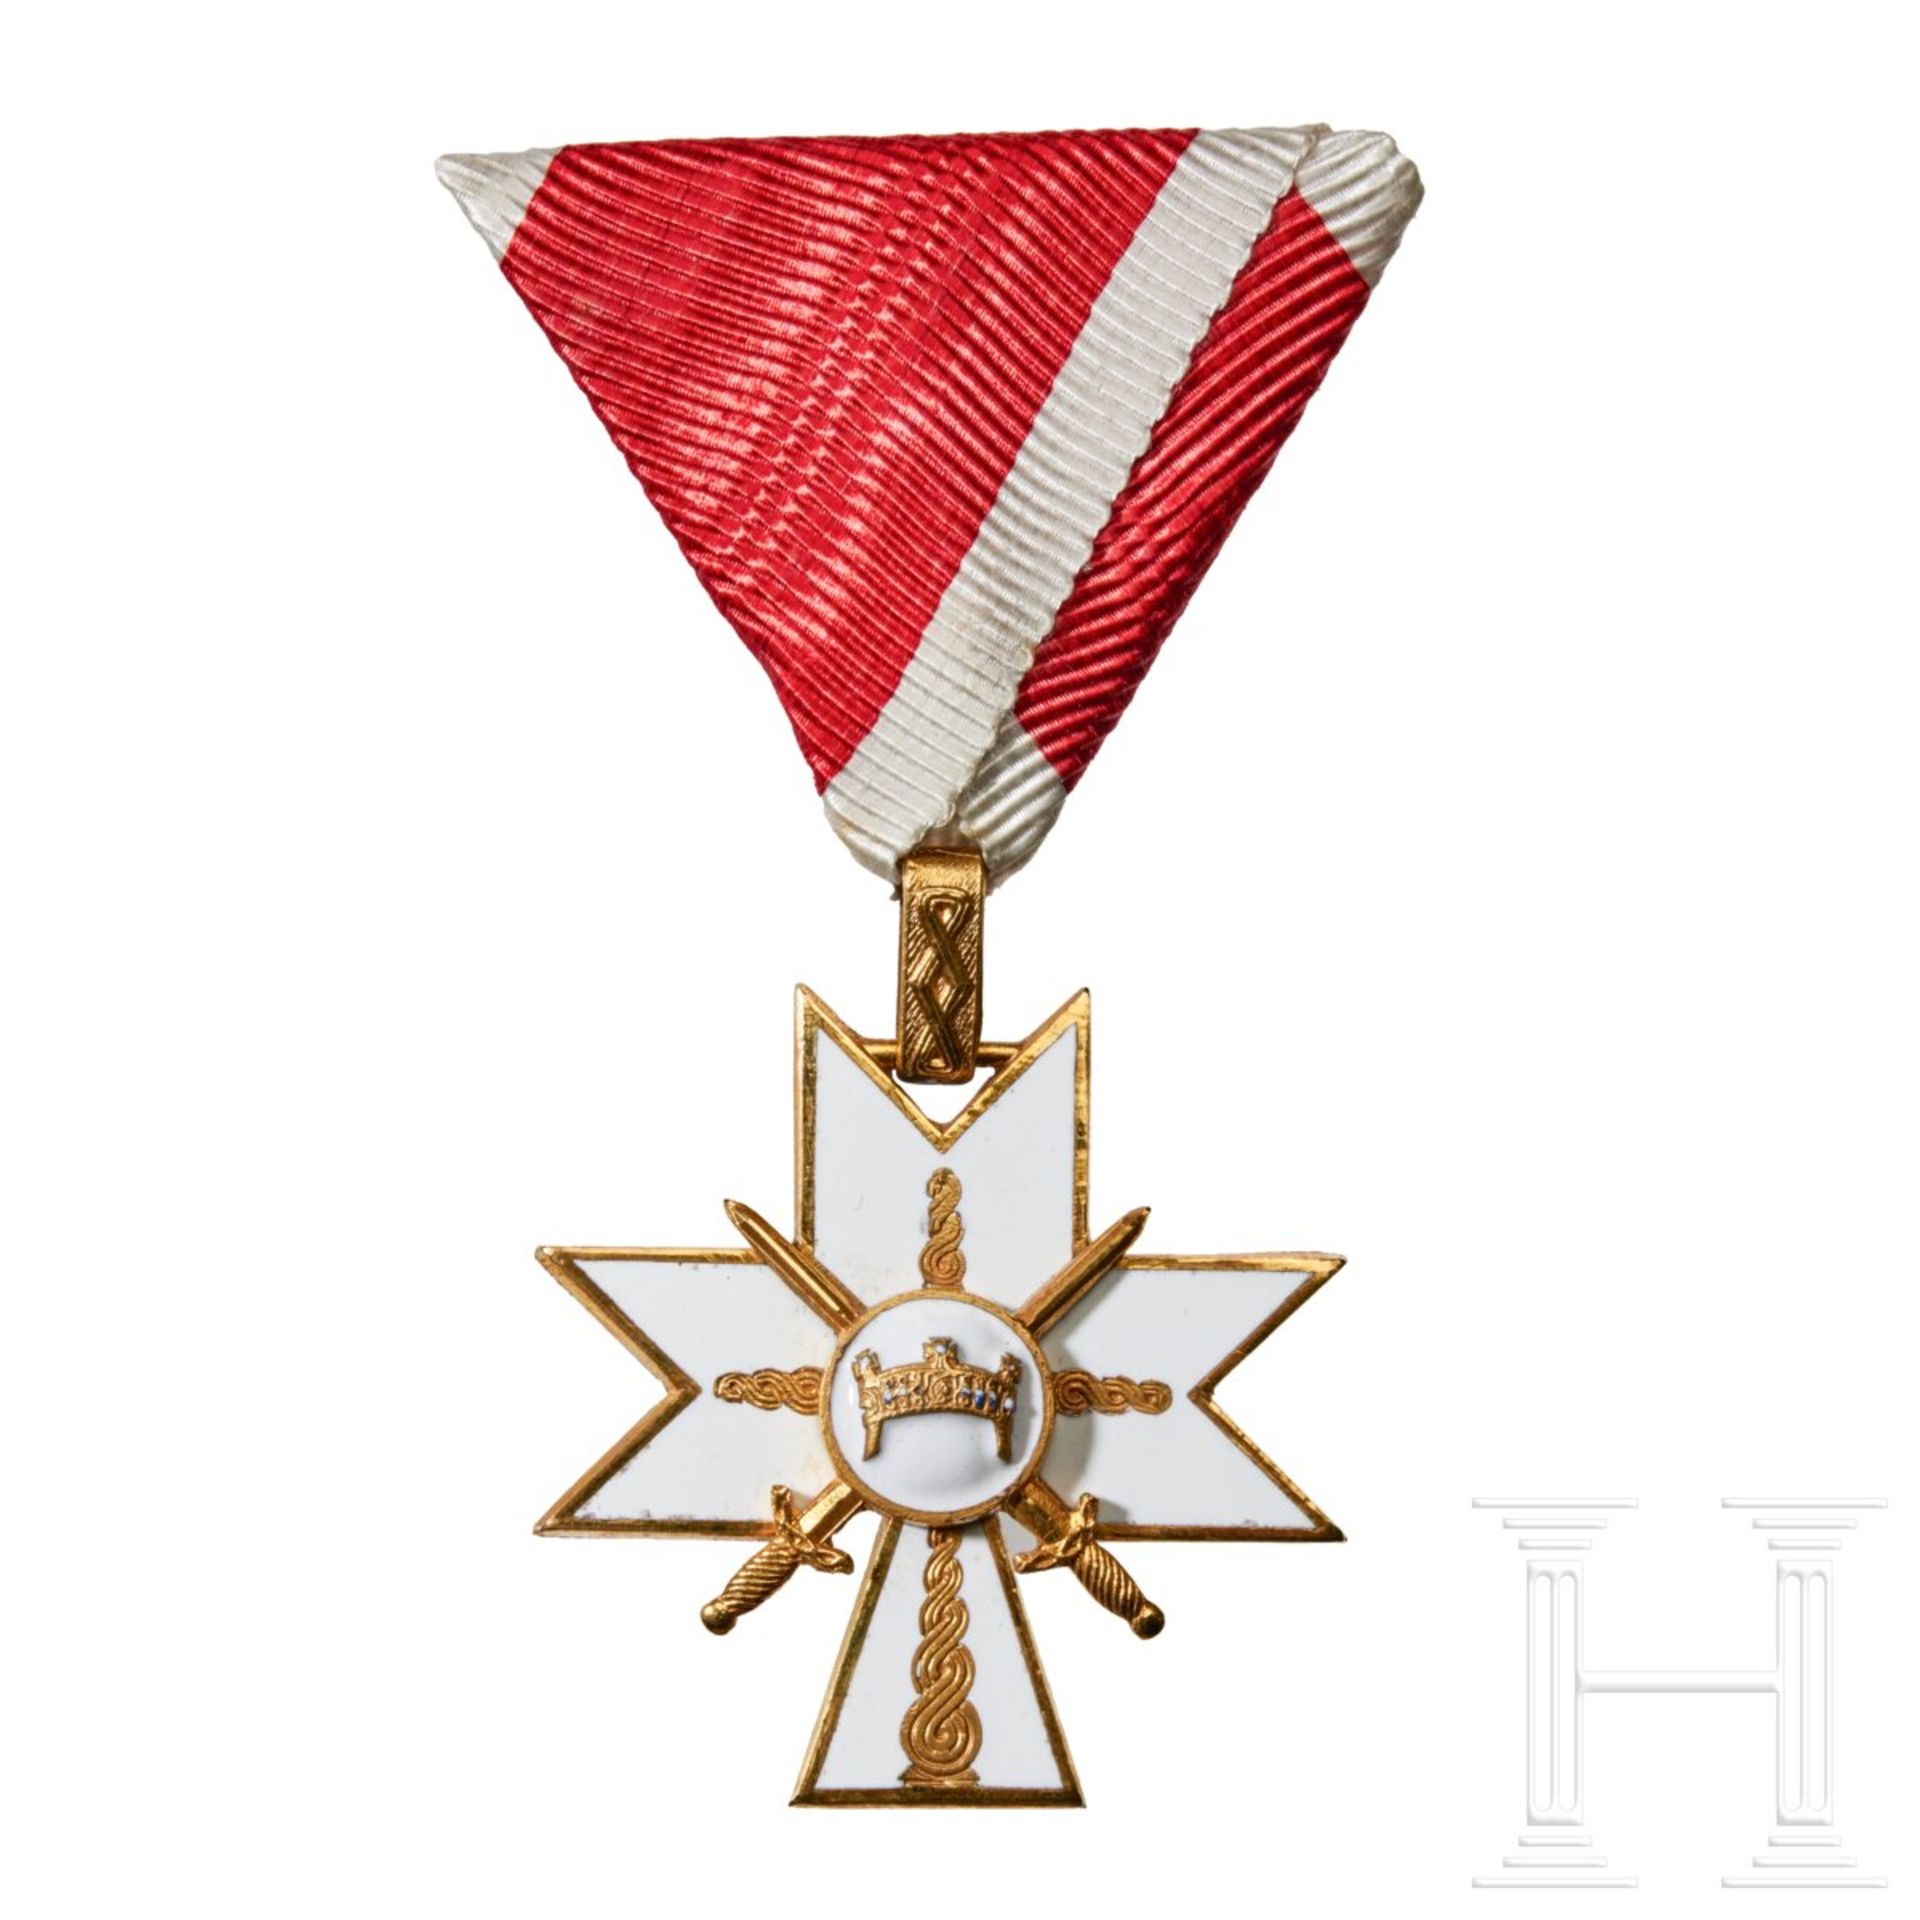 A Croatian Order of King Zvonimir 3rd Class with Swords - Image 2 of 4